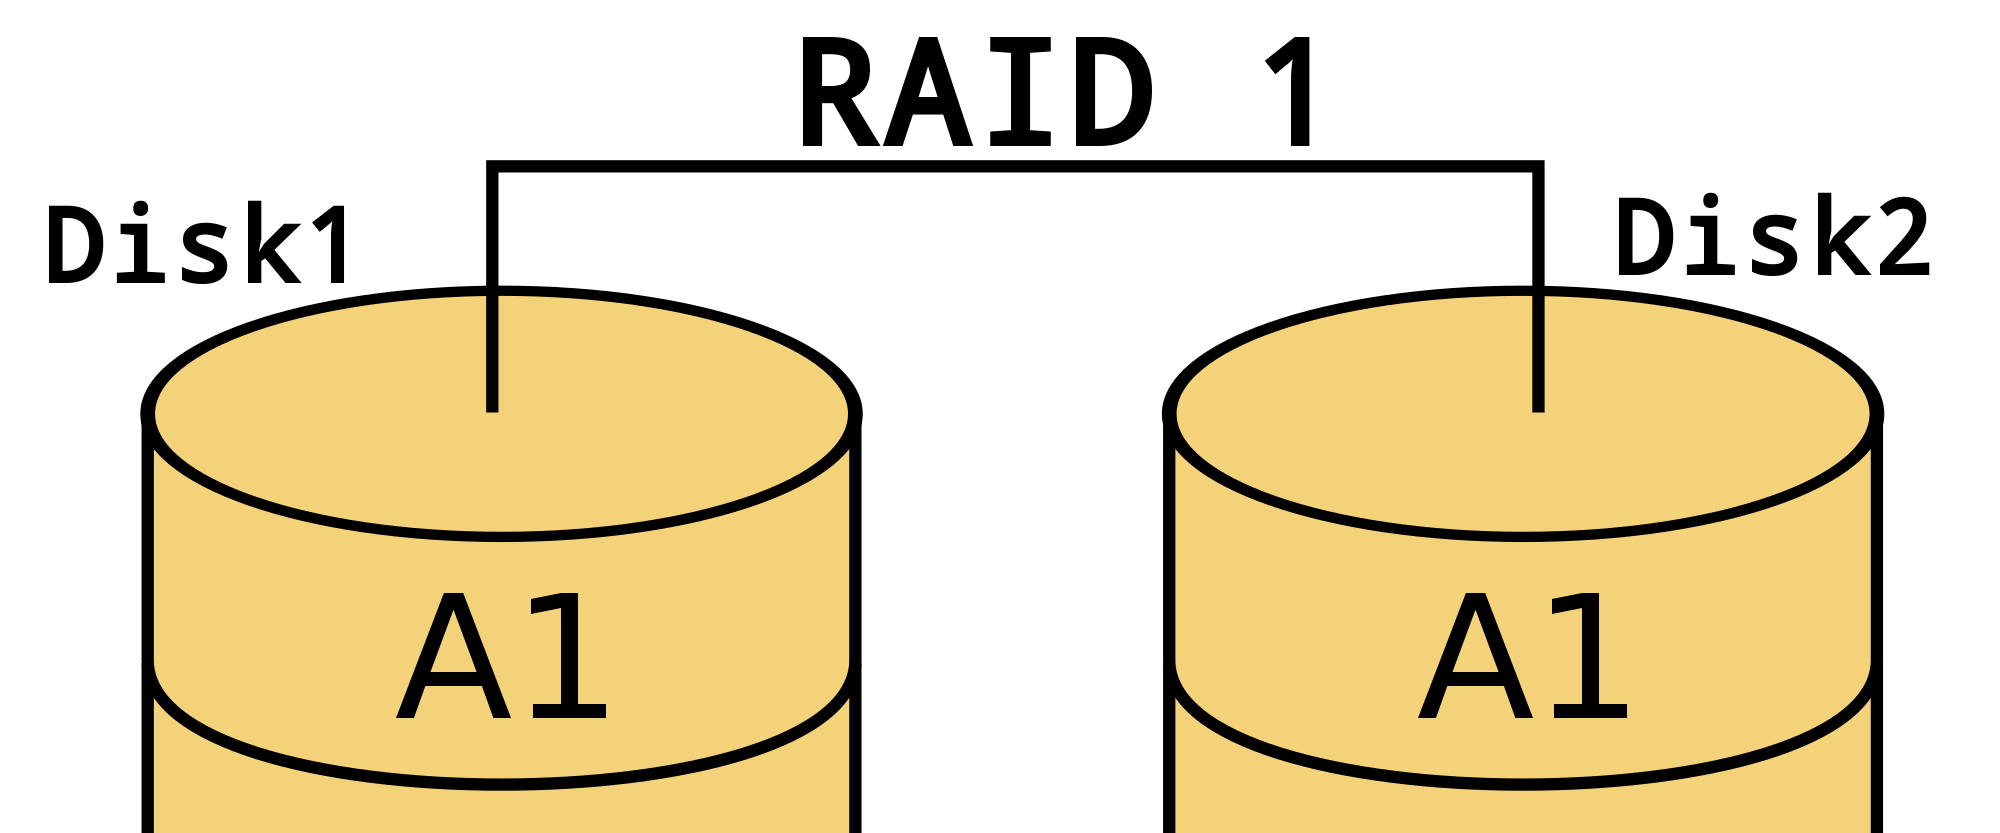 Featured image of btrfs raid1 to combine two separate partitions